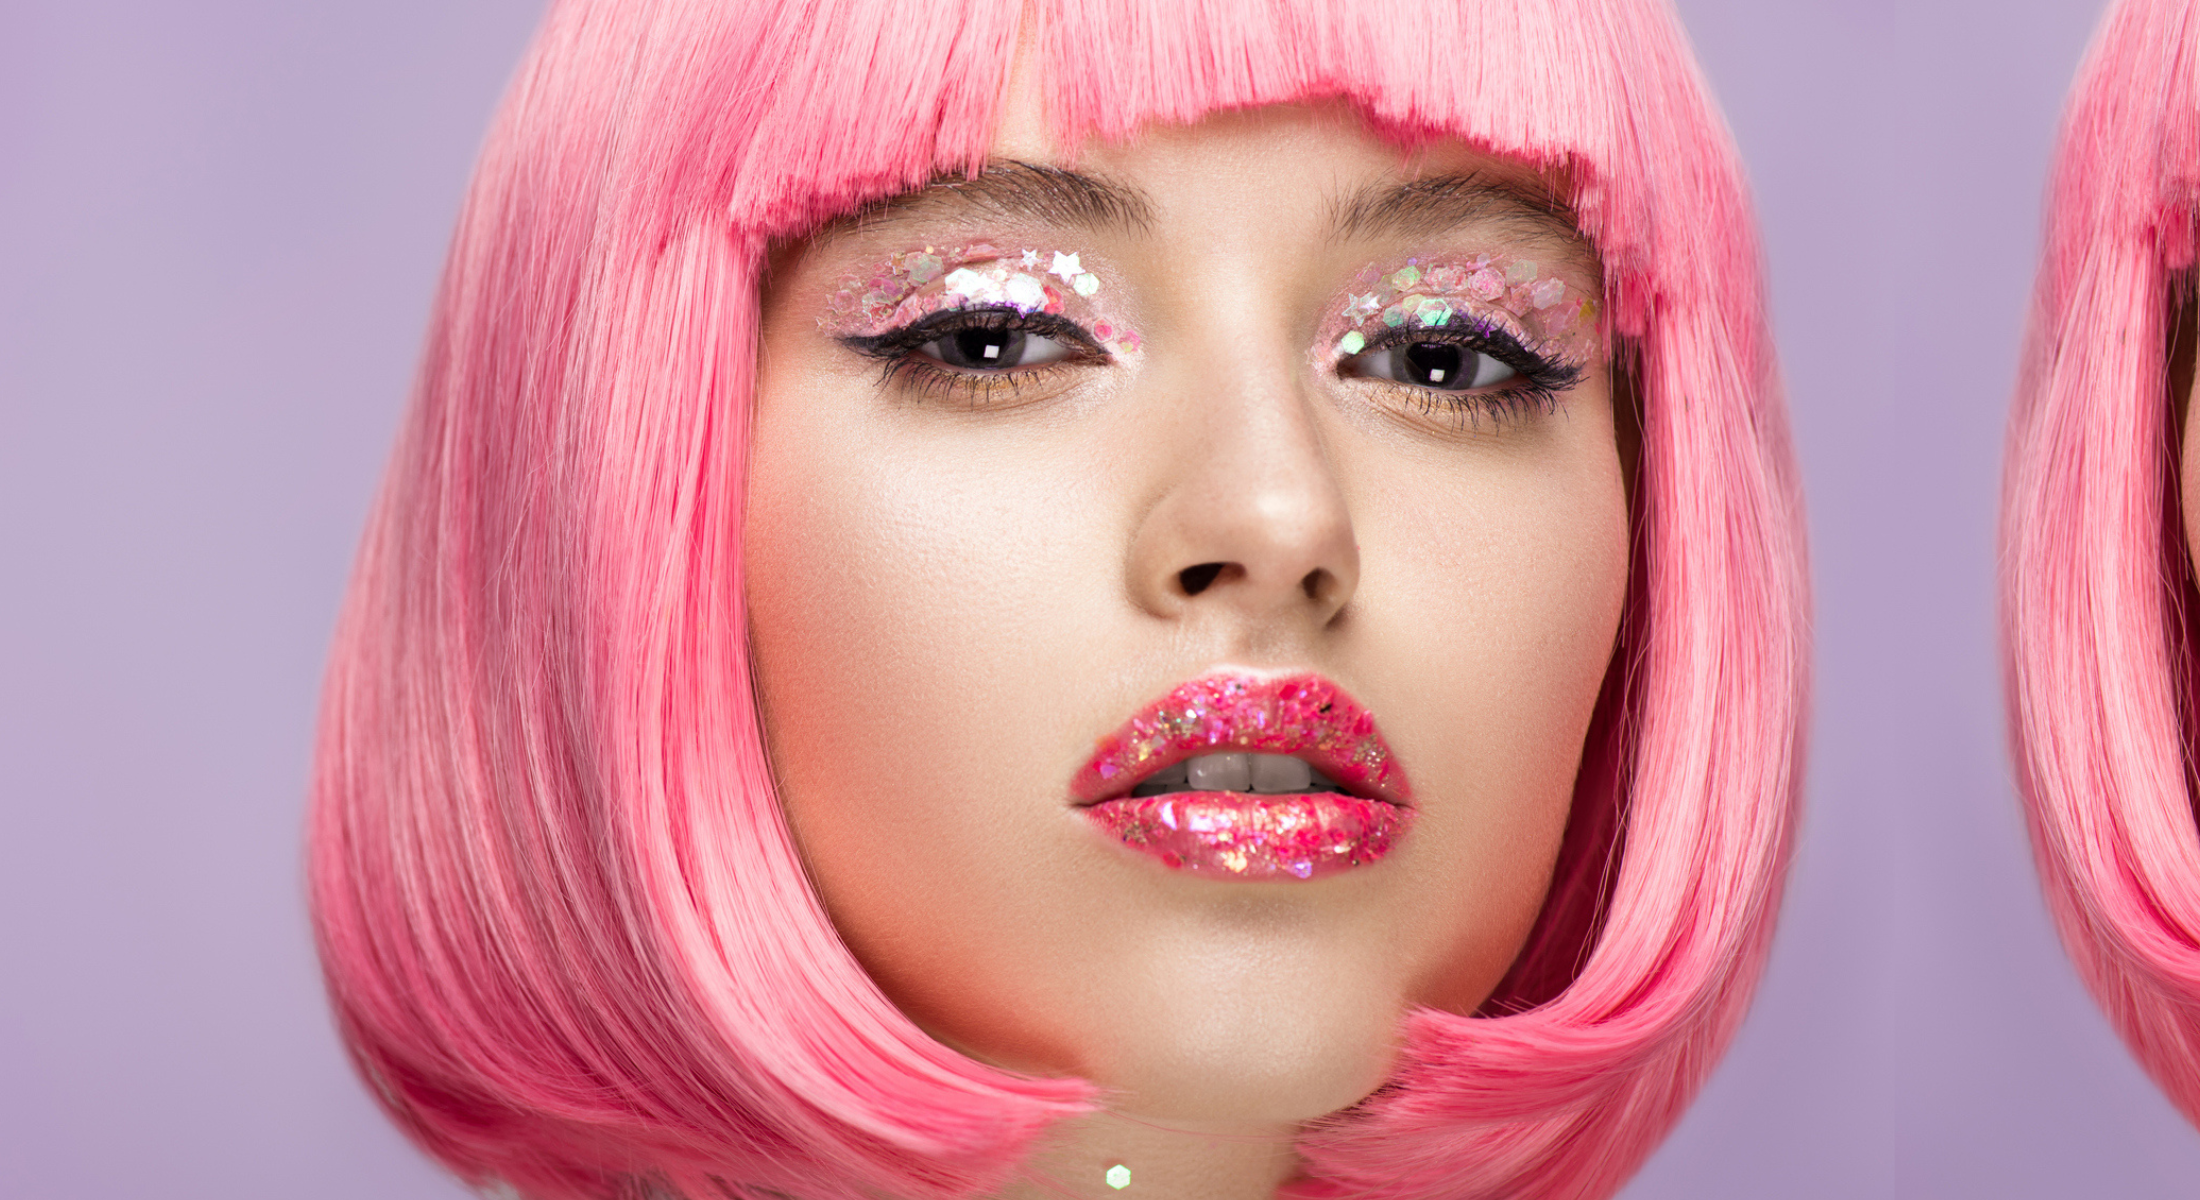 Model with pink hair wearing glittergasm glitter eyeshadow on her eyes and lips